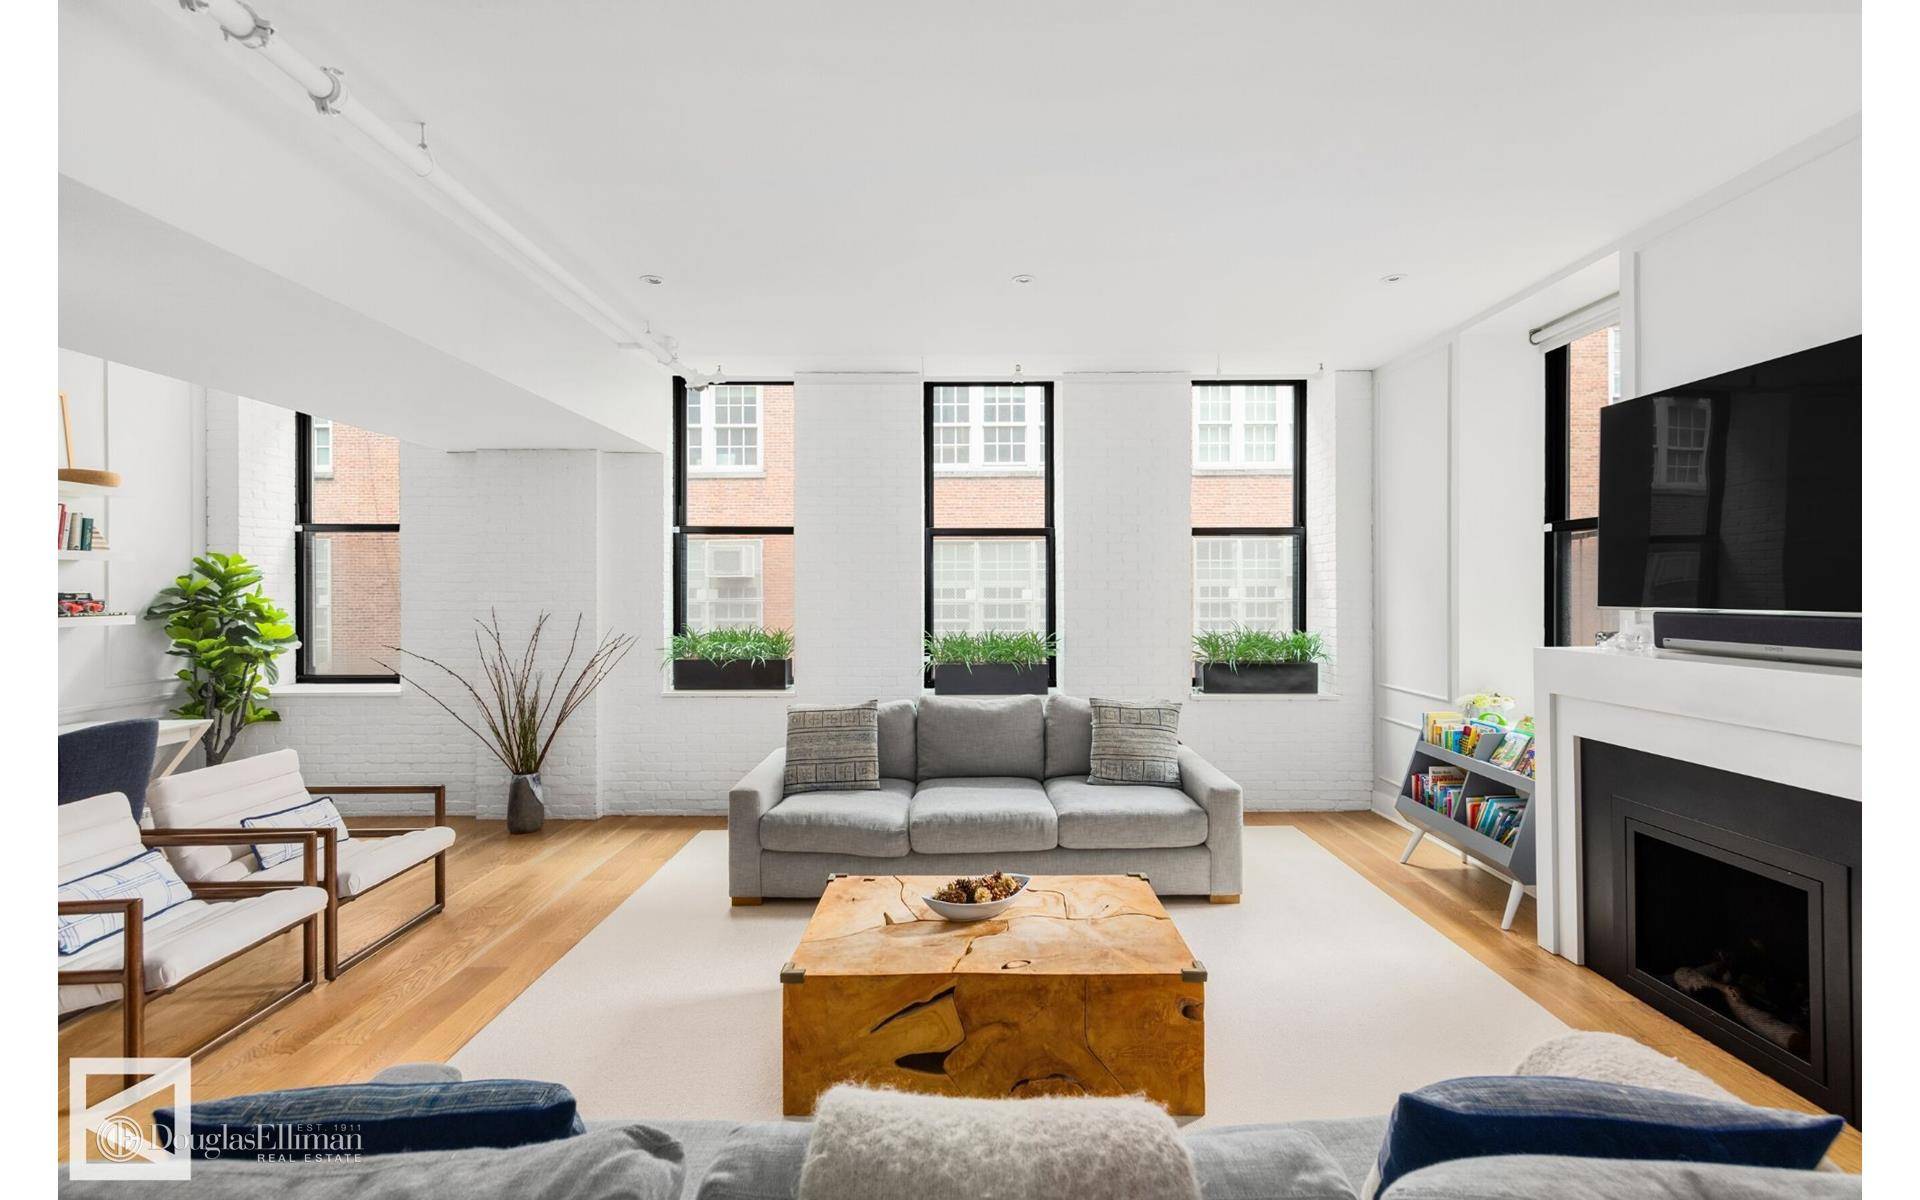 Situated on the coveted Mulberry Street in the heart of Nolita this unrivaled four bedroom, 3.